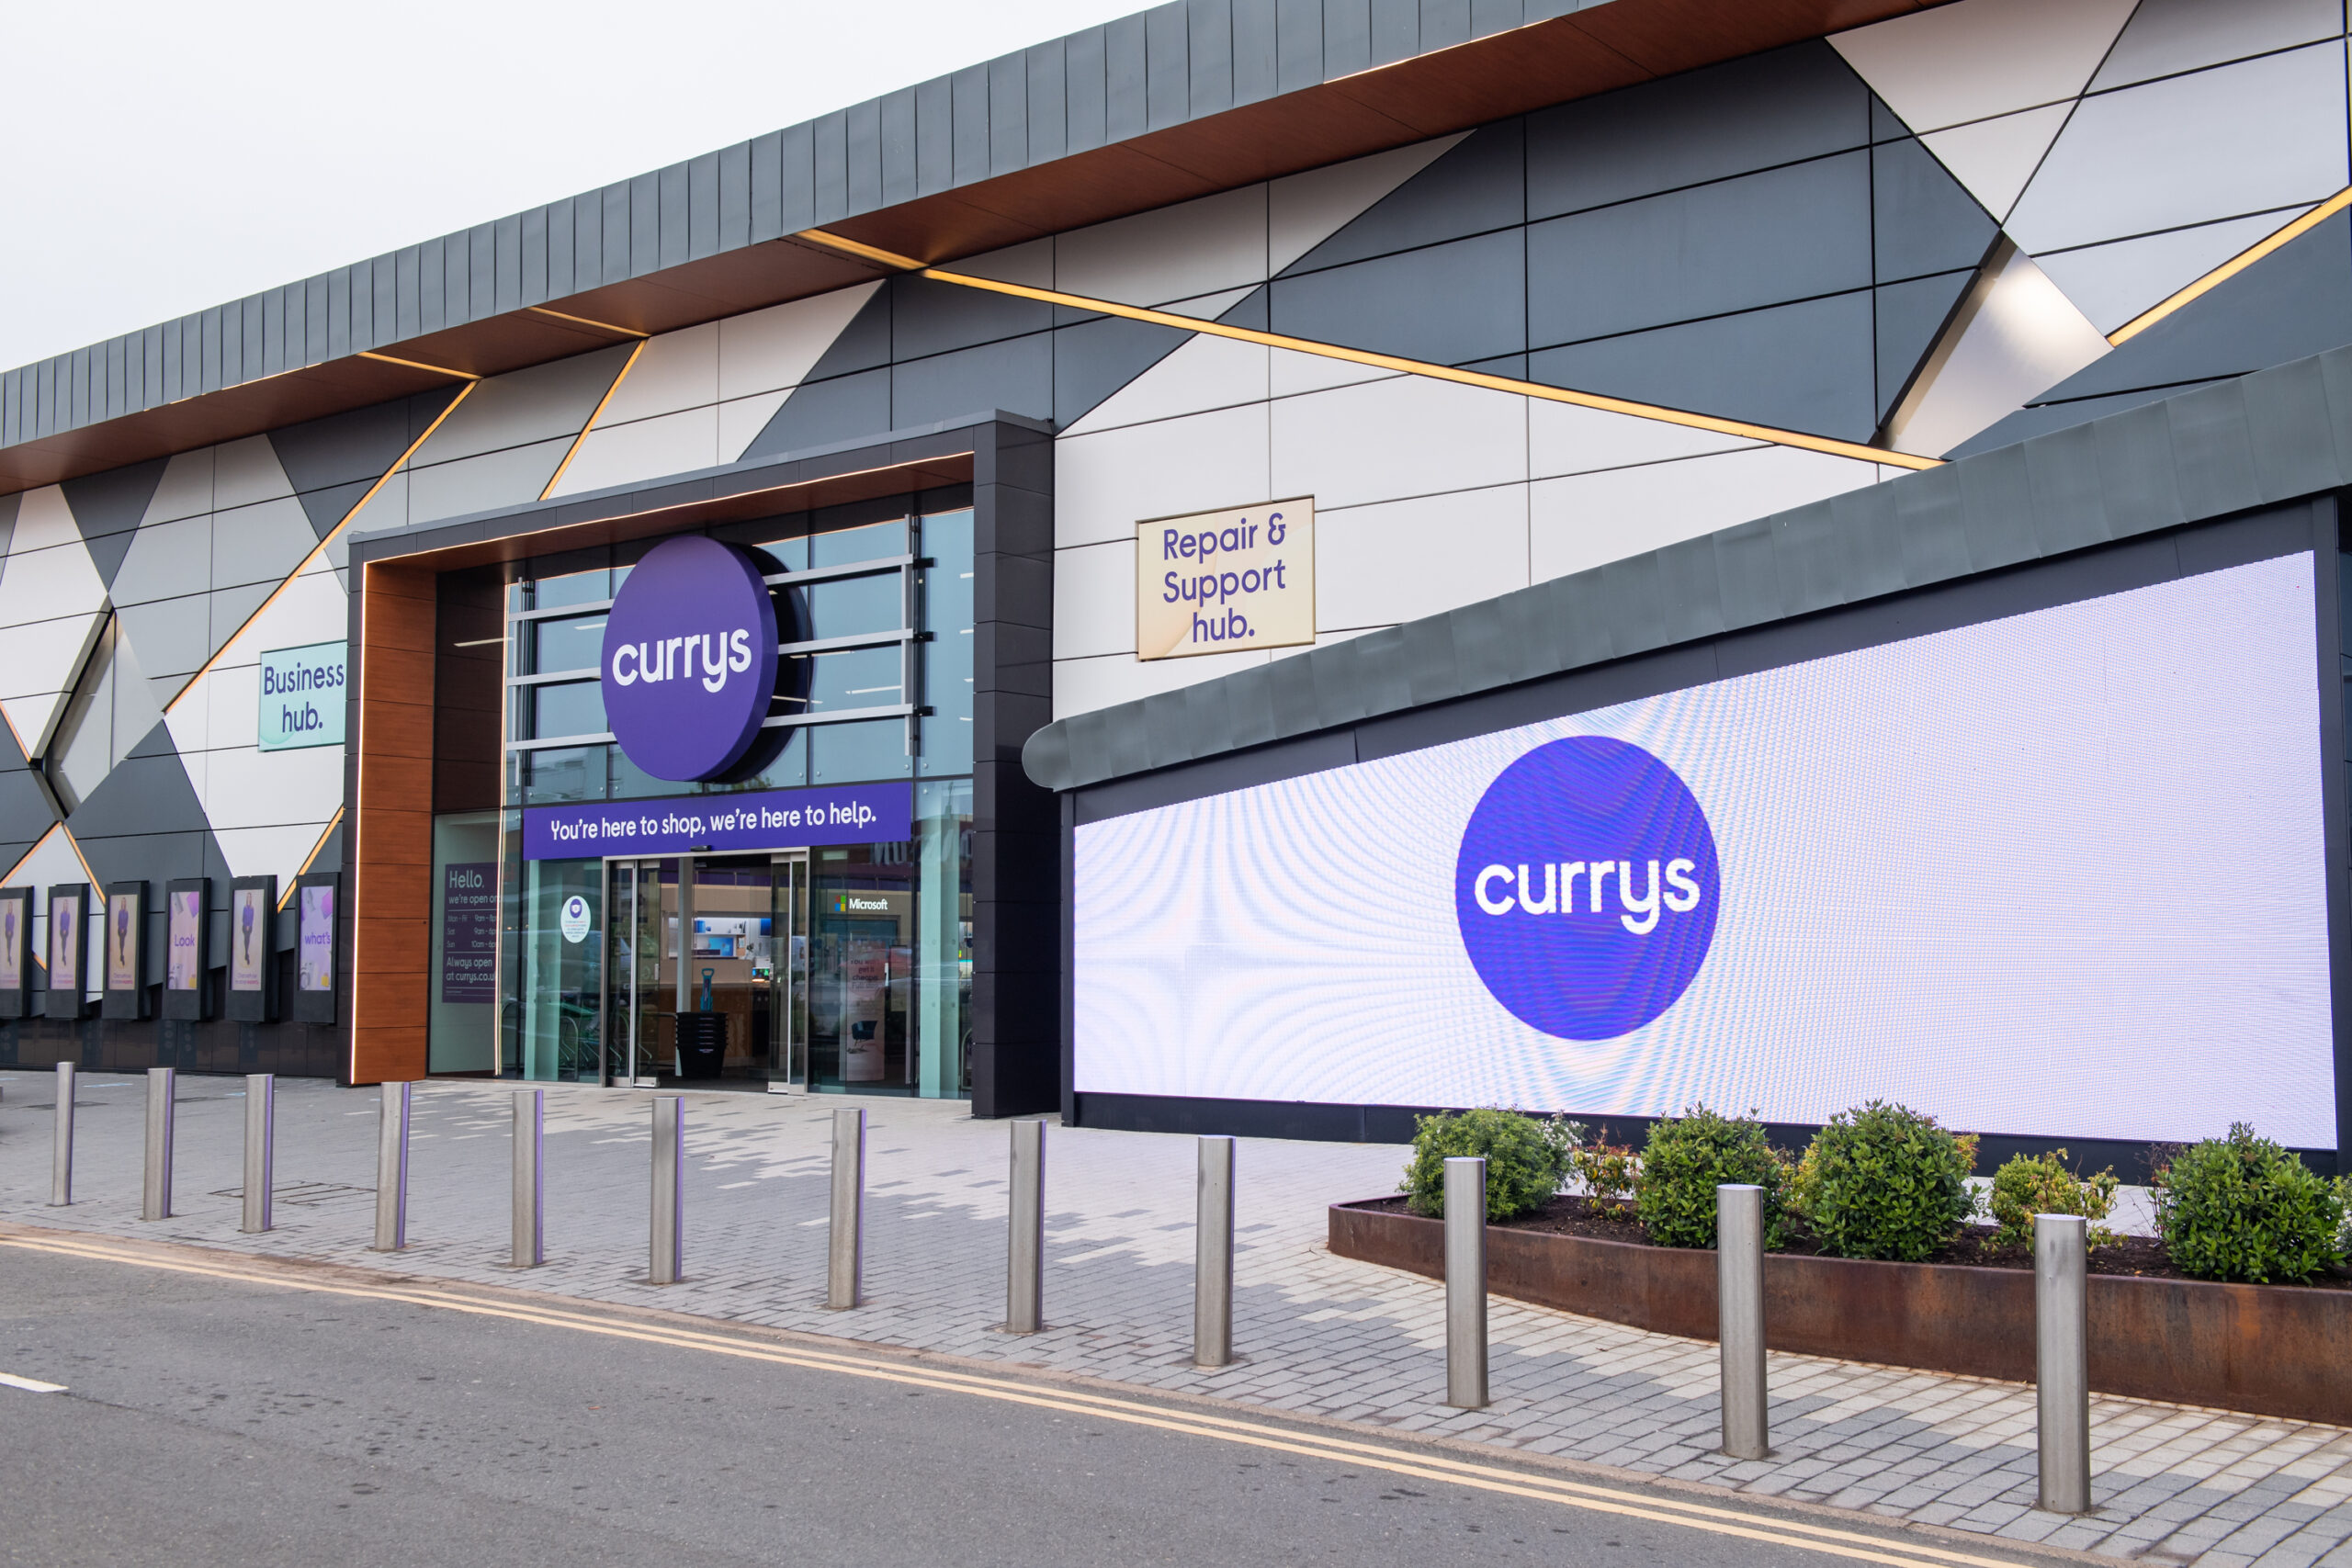 stock photo of a Currys store